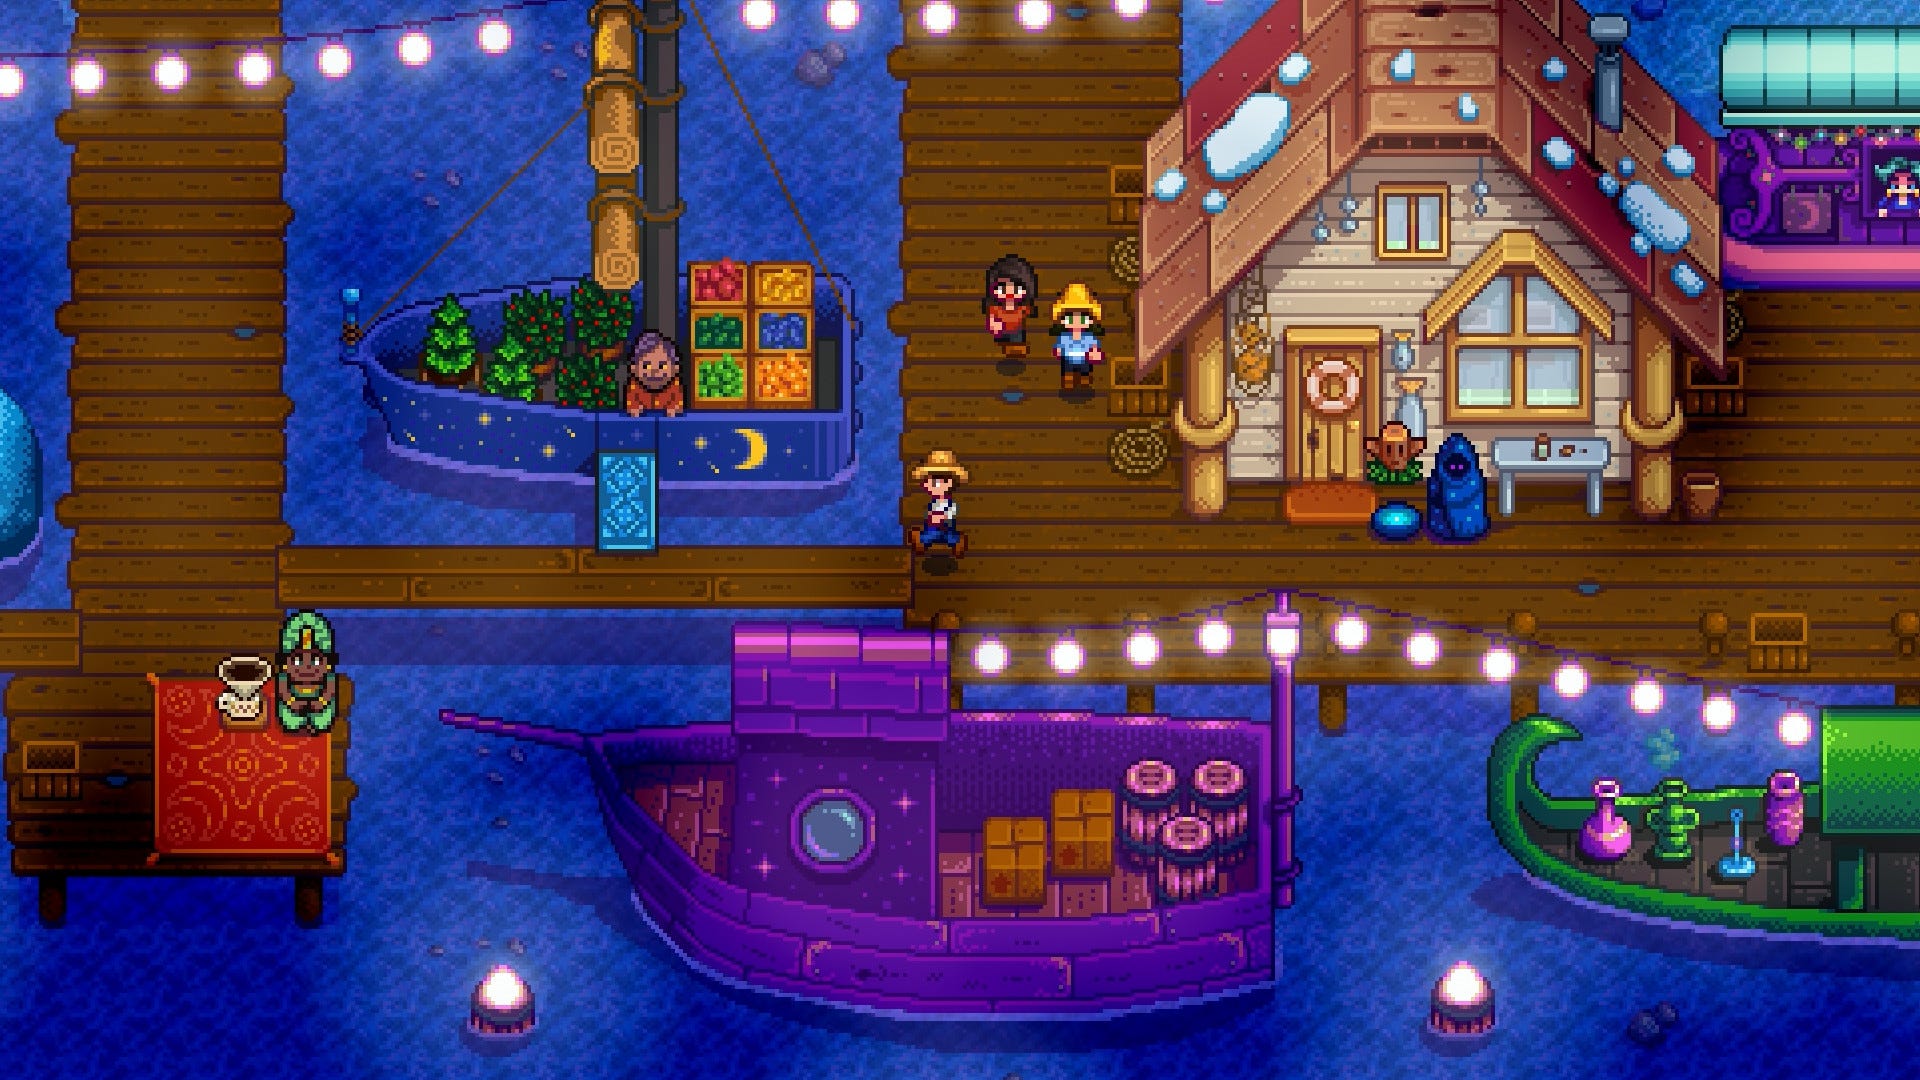 Stardew Valley boat dock with characters